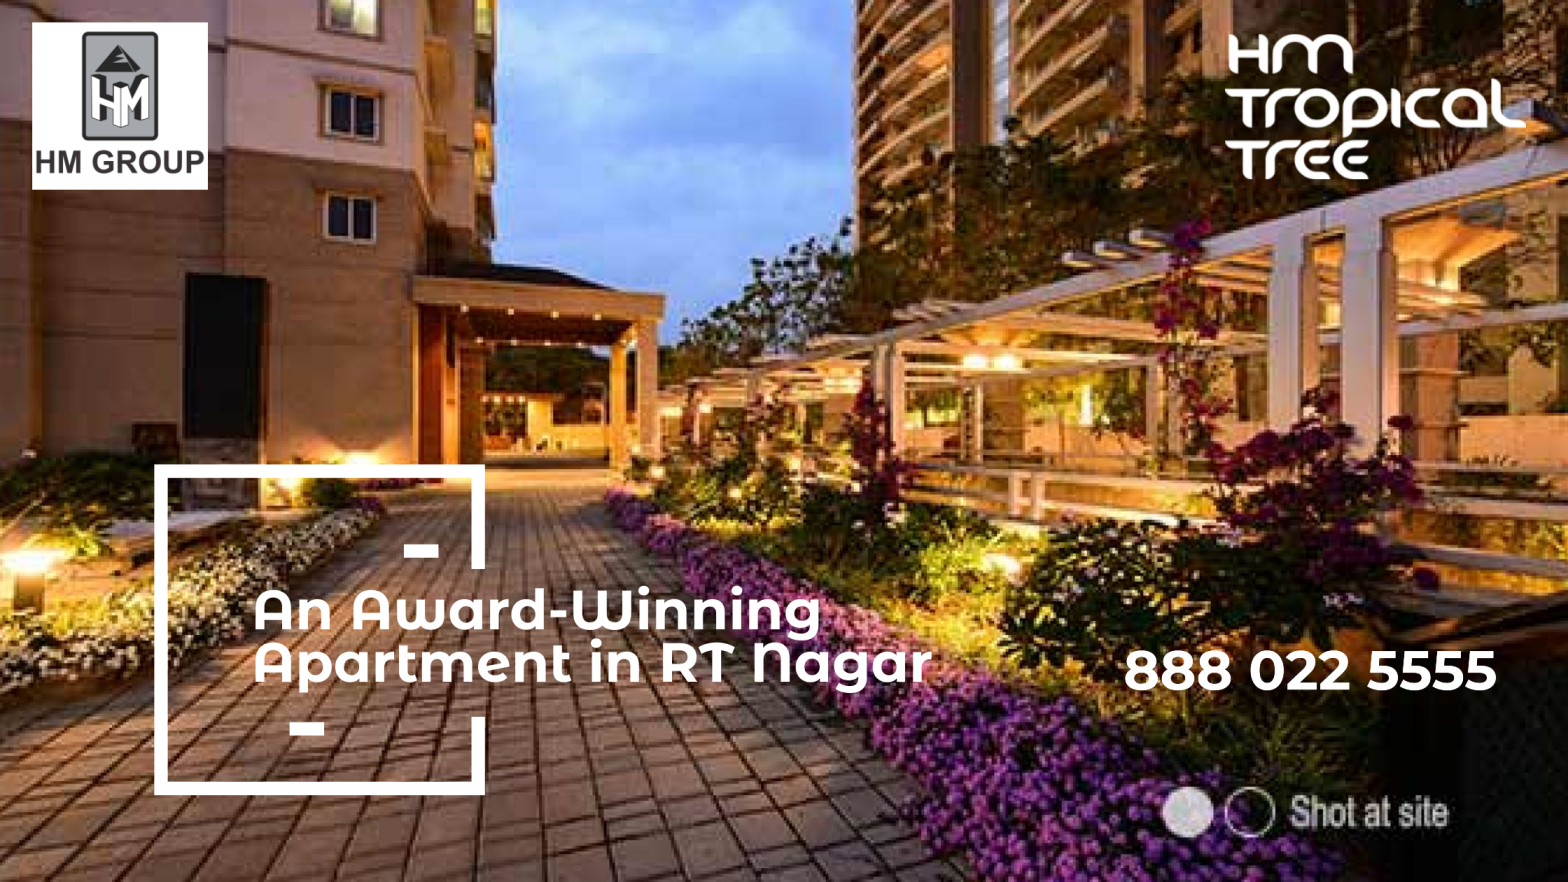 Live In The Heart Of The City At An Award-Winning Apartment Complex In RT Nagar